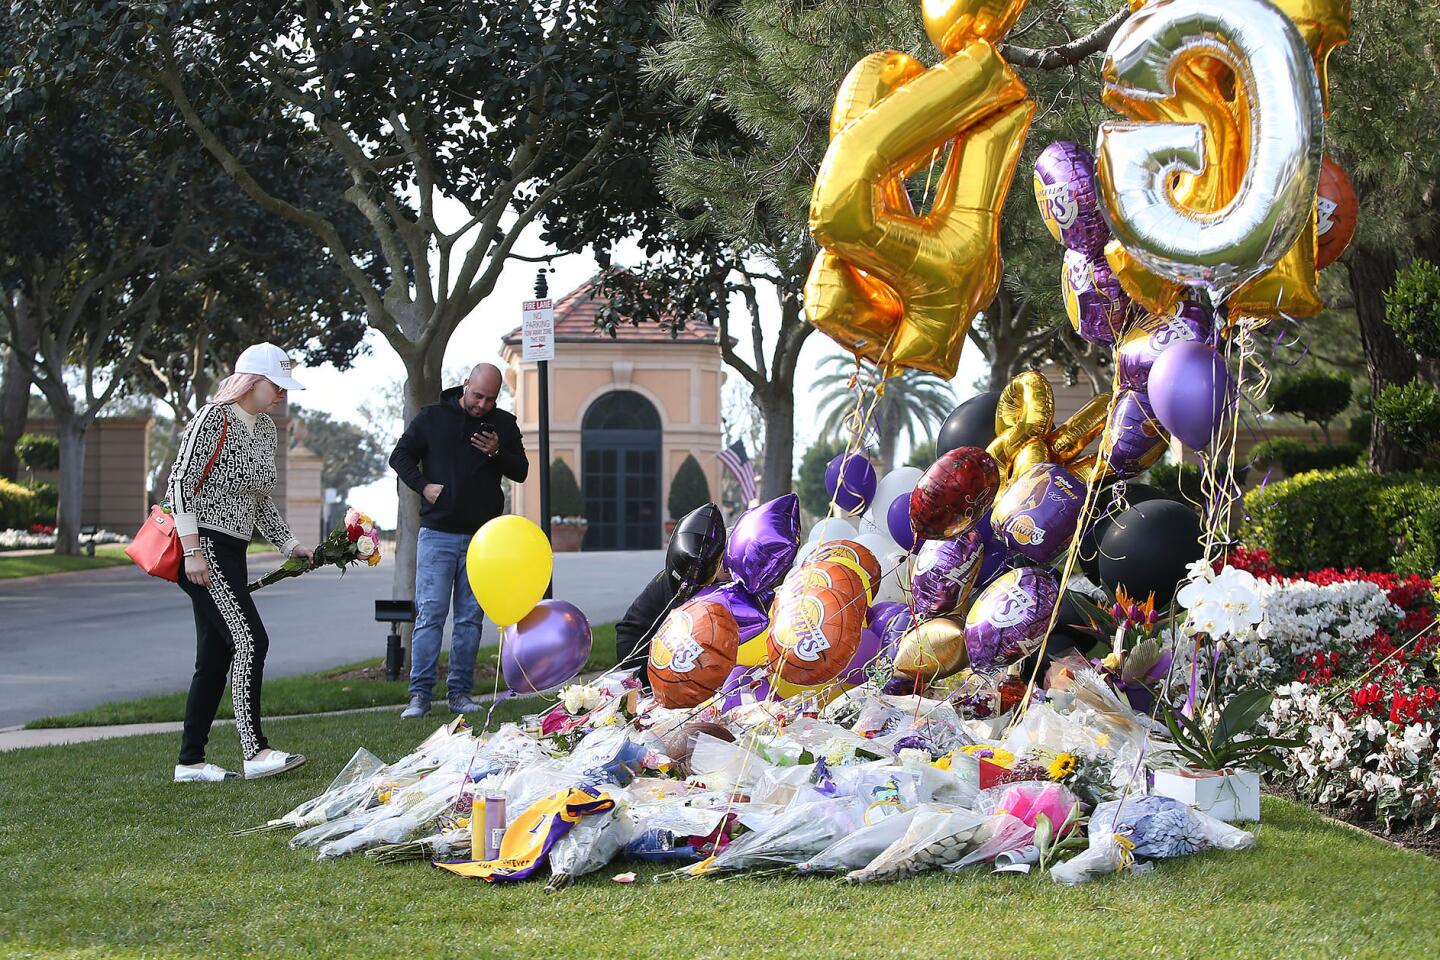 People pay tribute to Kobe Bryant outside the gated community in Newport Coast where his family lives.